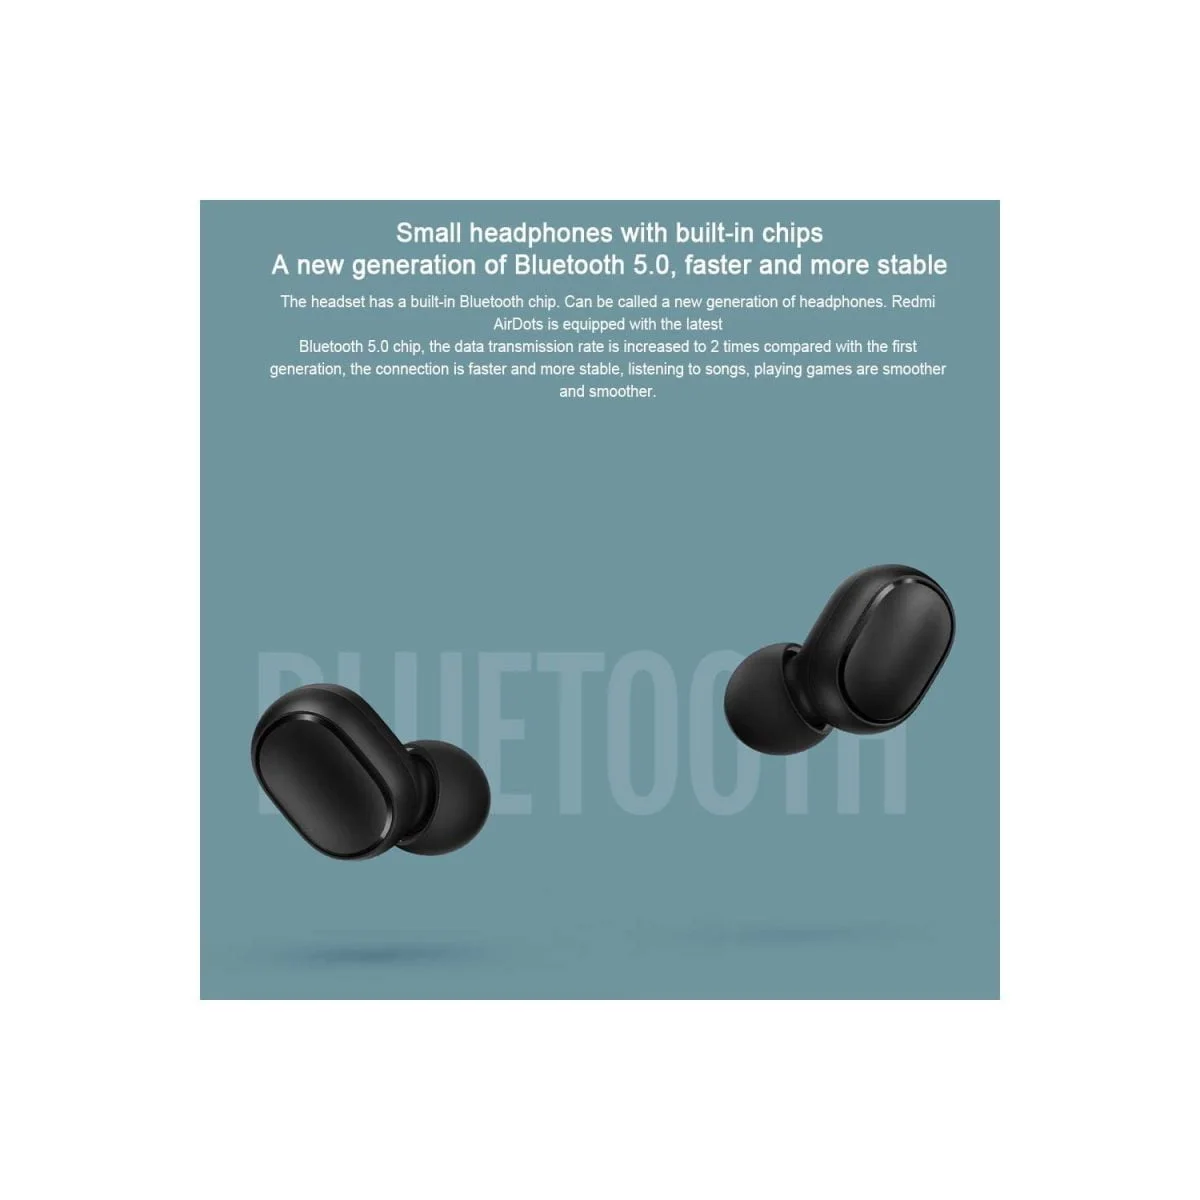 13808976 4 Xiaomi Redmi Airdots Is Equipped With The Latest Bluetooth 5.0 Chip, The Data Transfer Rate Is Up To 2 Times Compared With The Previous Generation, The Connection Is Faster And More Stable. Listening To Songs And Playing Games Are Smoother. Https://Youtu.be/Navo49Ya_Re Xiaomi Xiaomi (Twsej05Ls) Redmi Airdots Basic S Wireless Bluetooth Sweat Proof Earbuds - Black